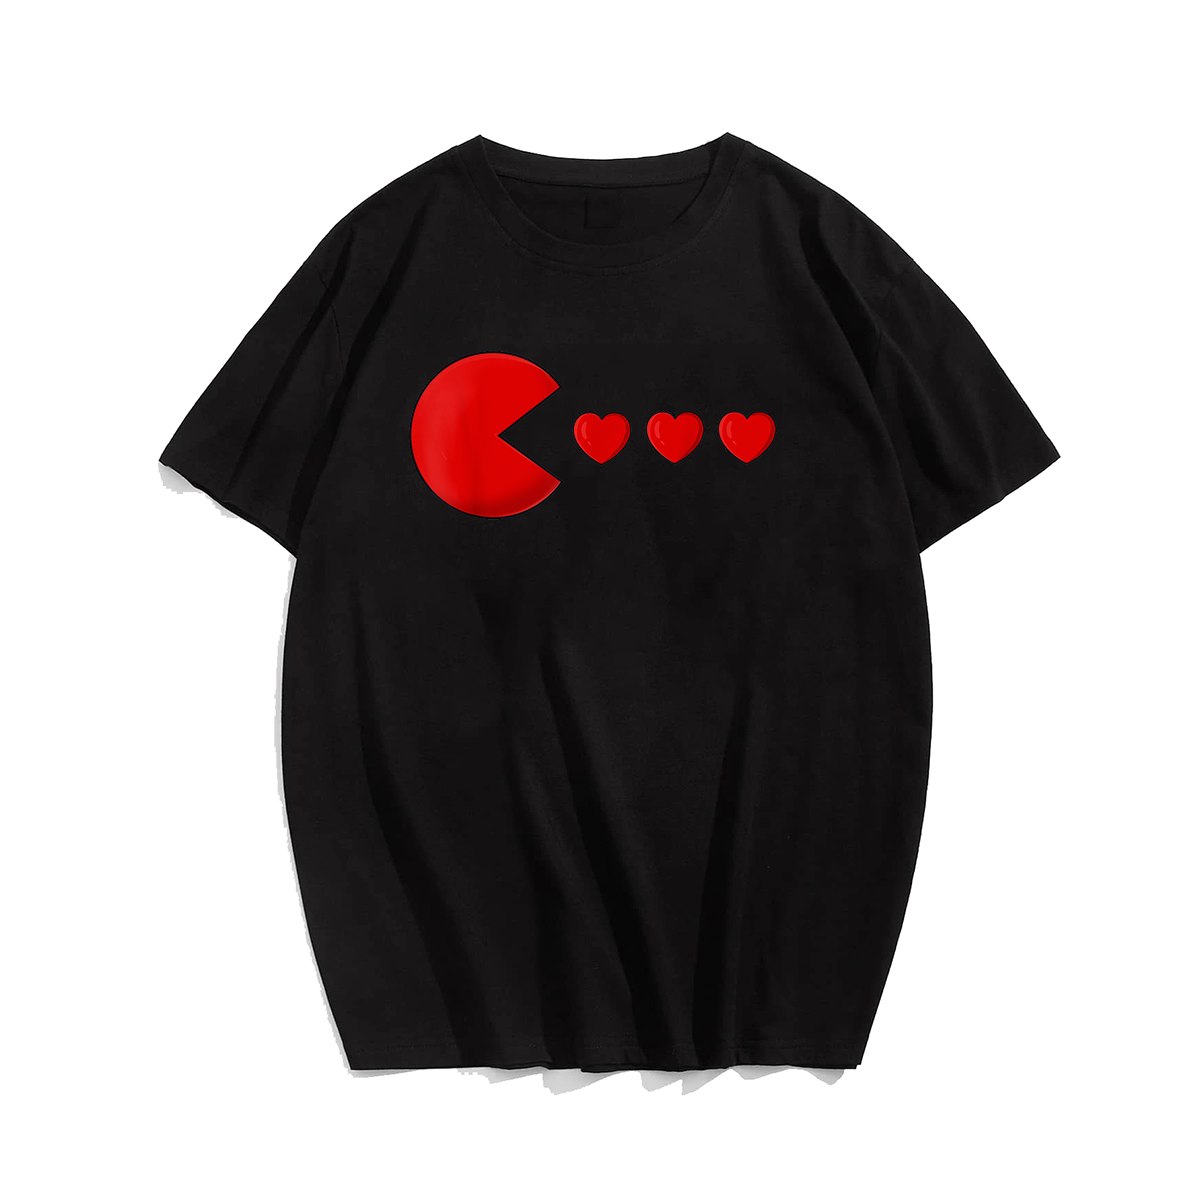 Hearts Valentine Valentines Day T-Shirt, Men Plus Size Oversize T-shirt for Big & Tall Man